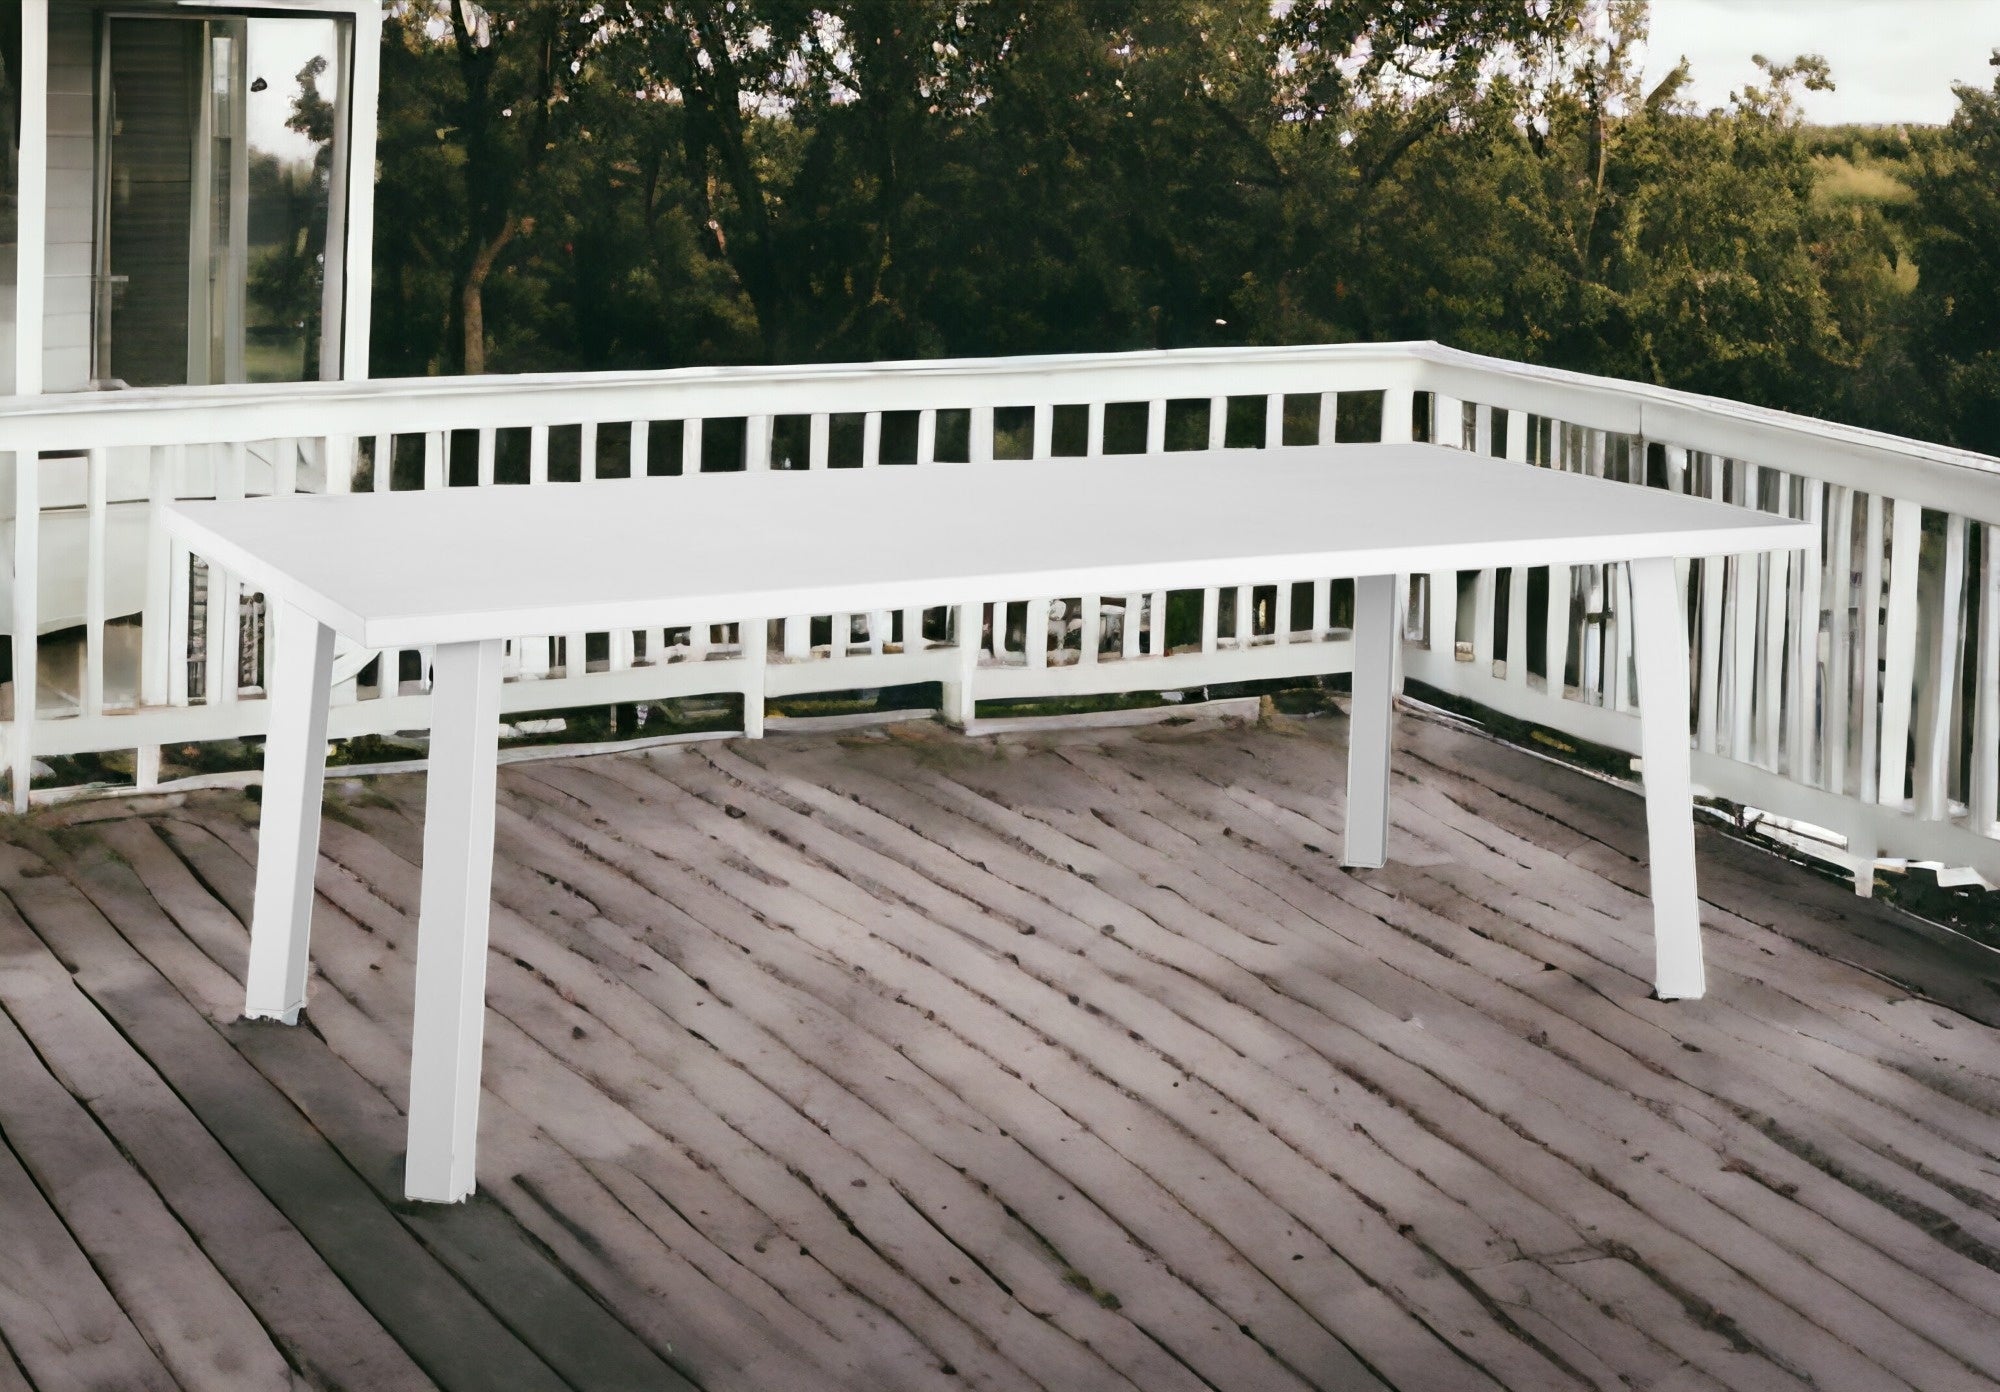 87" White Aluminum Outdoor Dining Table